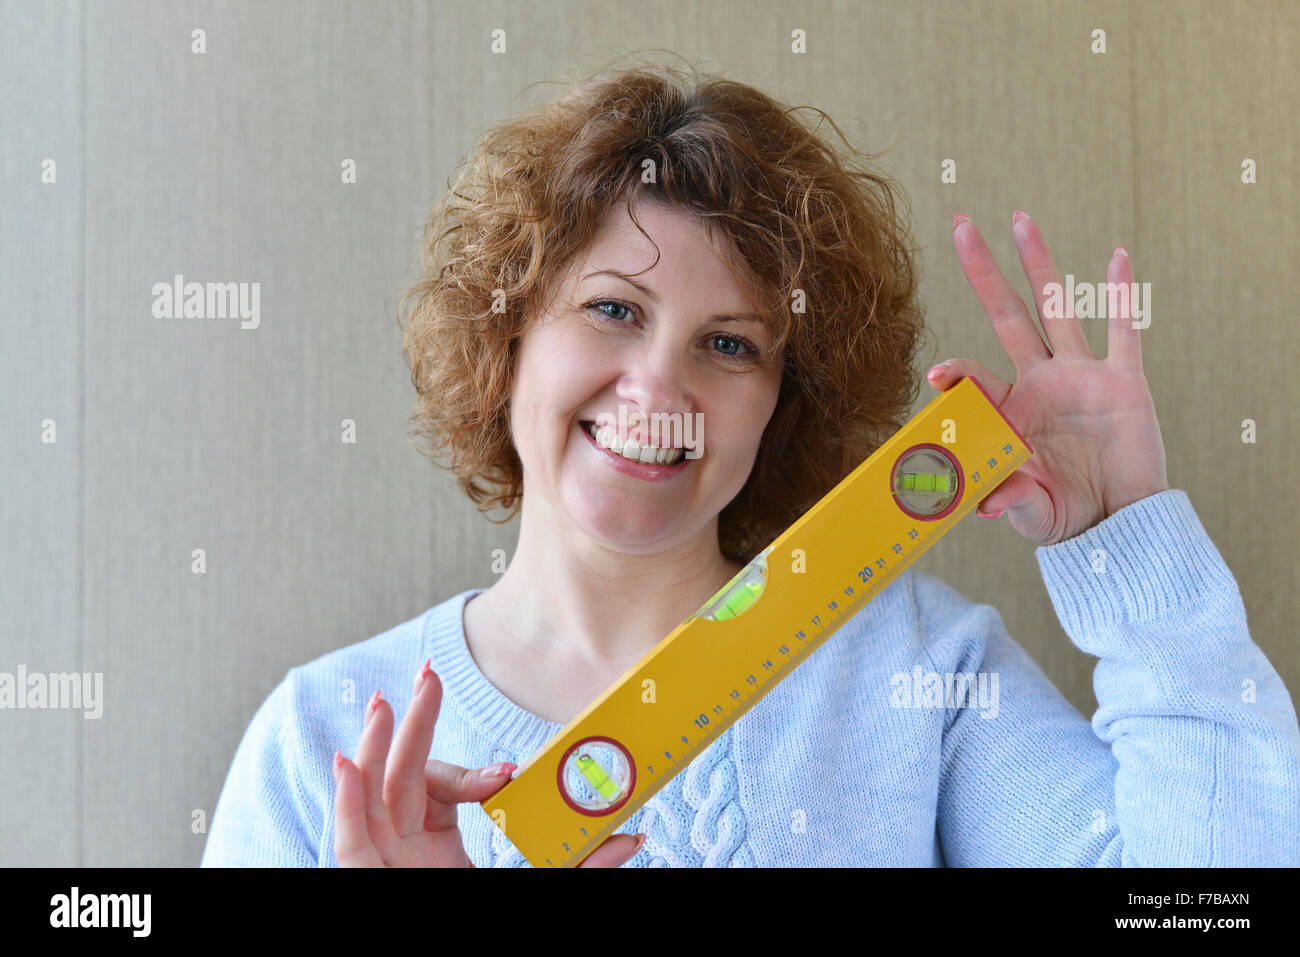 woman is holding construction tools Stock Photo